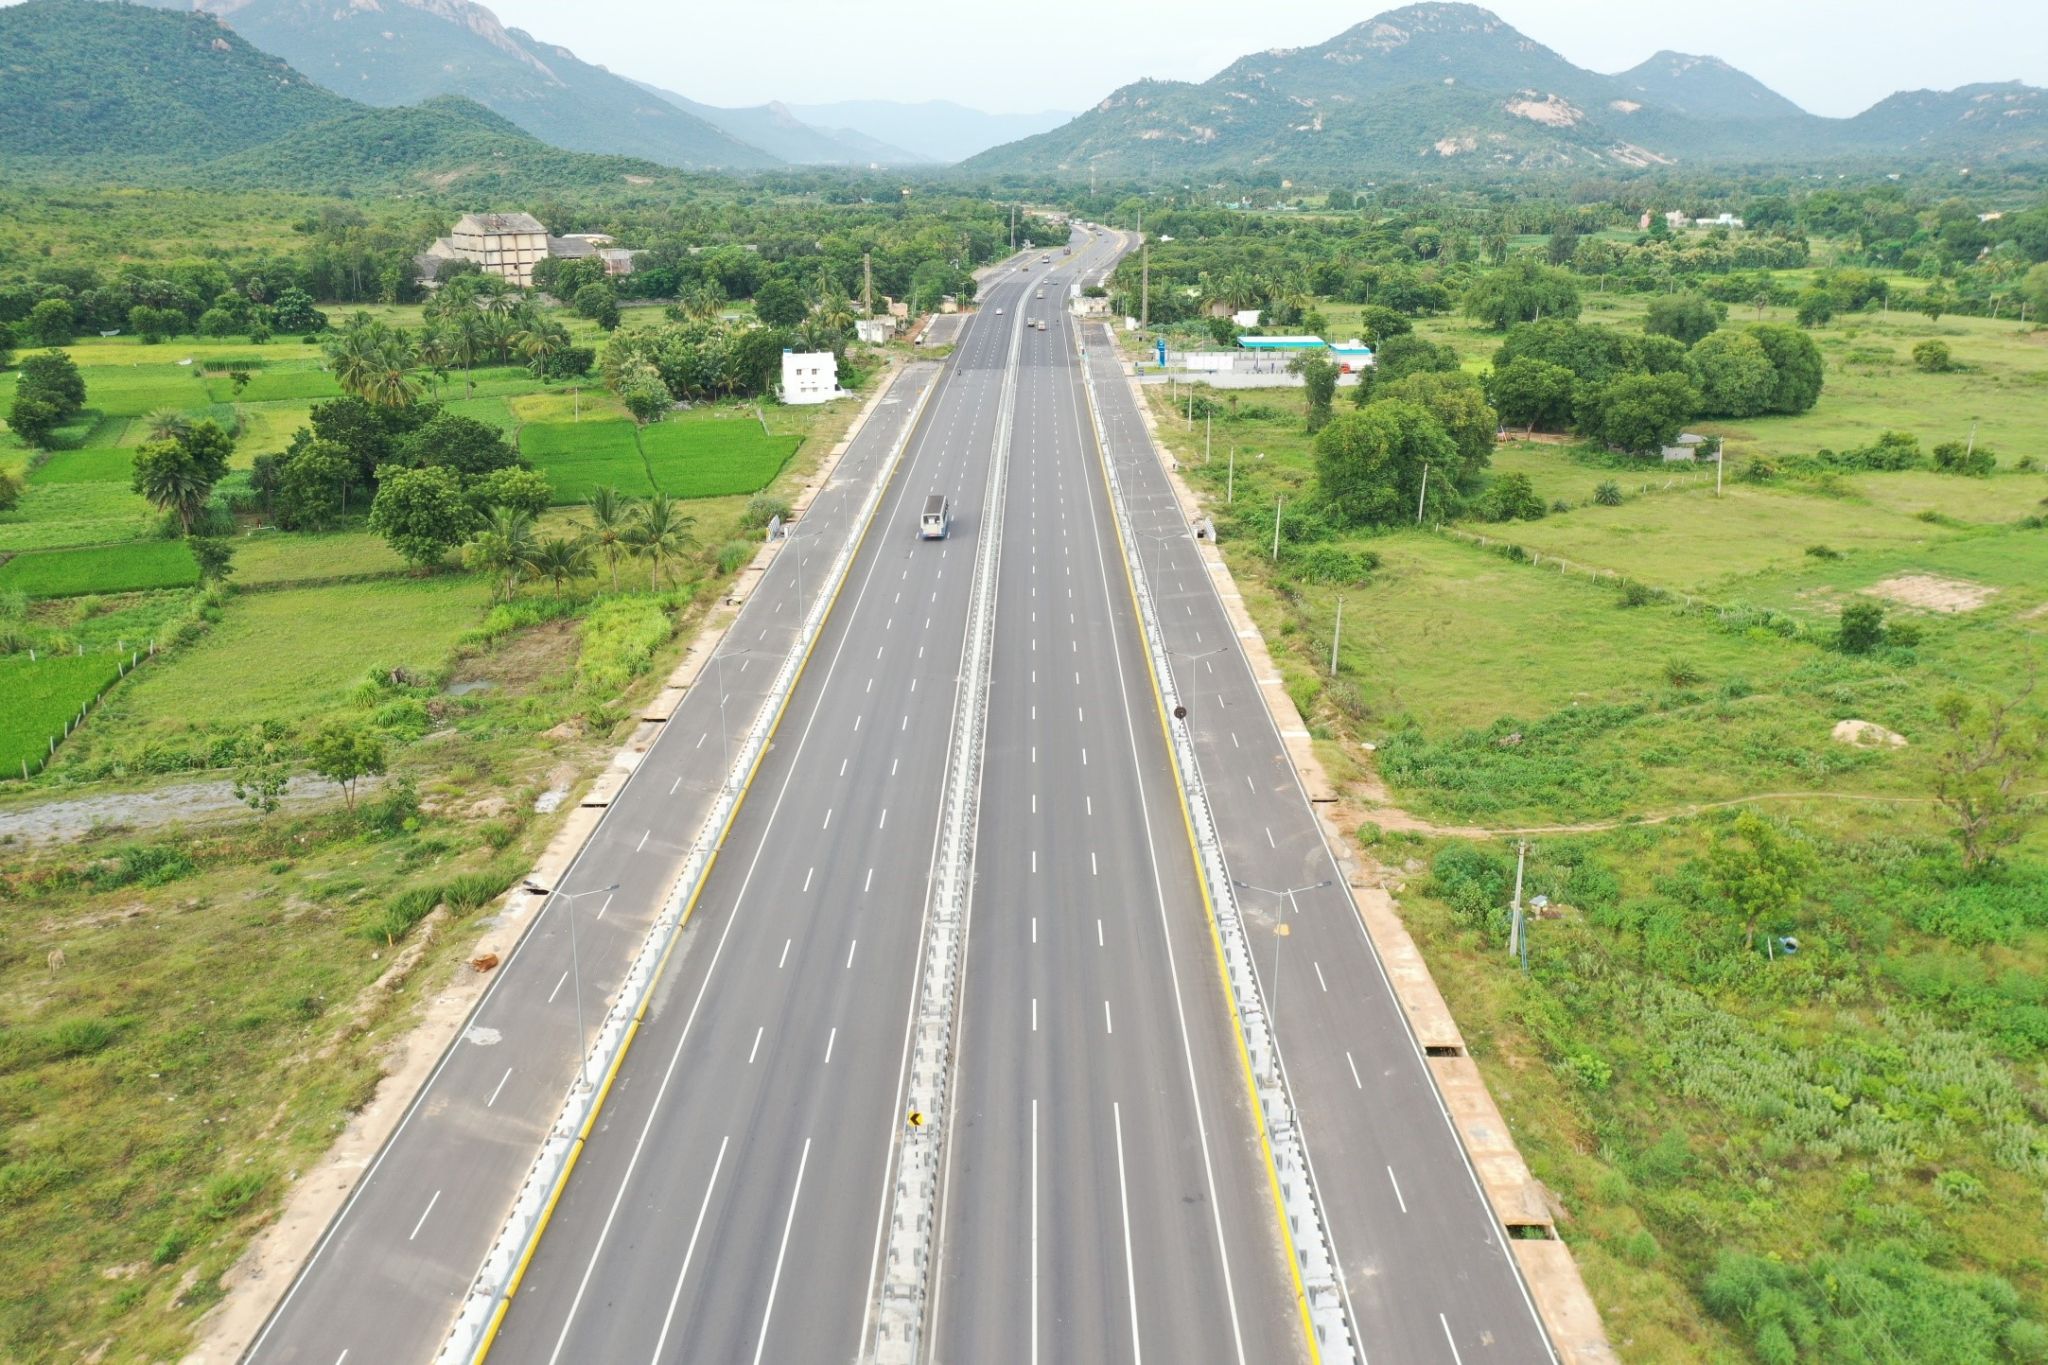 M/s SBPL got new road project in UP, value Rs. 271 Cr. MoRTH Project